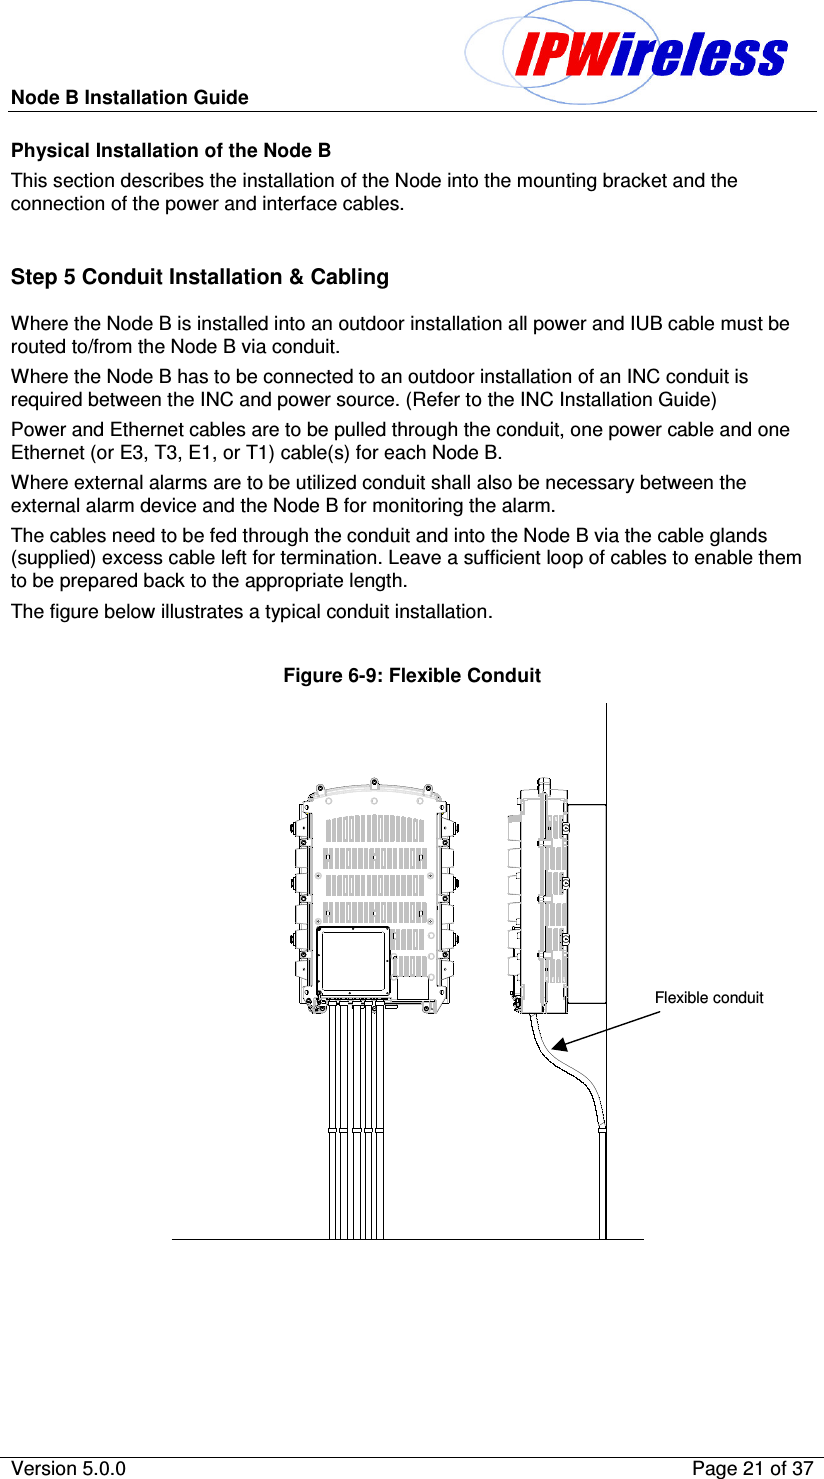 Node B Installation Guide                                              Version 5.0.0    Page 21 of 37  Physical Installation of the Node B This section describes the installation of the Node into the mounting bracket and the connection of the power and interface cables.  Step 5 Conduit Installation &amp; Cabling Where the Node B is installed into an outdoor installation all power and IUB cable must be routed to/from the Node B via conduit. Where the Node B has to be connected to an outdoor installation of an INC conduit is required between the INC and power source. (Refer to the INC Installation Guide) Power and Ethernet cables are to be pulled through the conduit, one power cable and one Ethernet (or E3, T3, E1, or T1) cable(s) for each Node B.  Where external alarms are to be utilized conduit shall also be necessary between the external alarm device and the Node B for monitoring the alarm. The cables need to be fed through the conduit and into the Node B via the cable glands (supplied) excess cable left for termination. Leave a sufficient loop of cables to enable them to be prepared back to the appropriate length. The figure below illustrates a typical conduit installation.  Figure 6-9: Flexible Conduit   Flexible conduit  